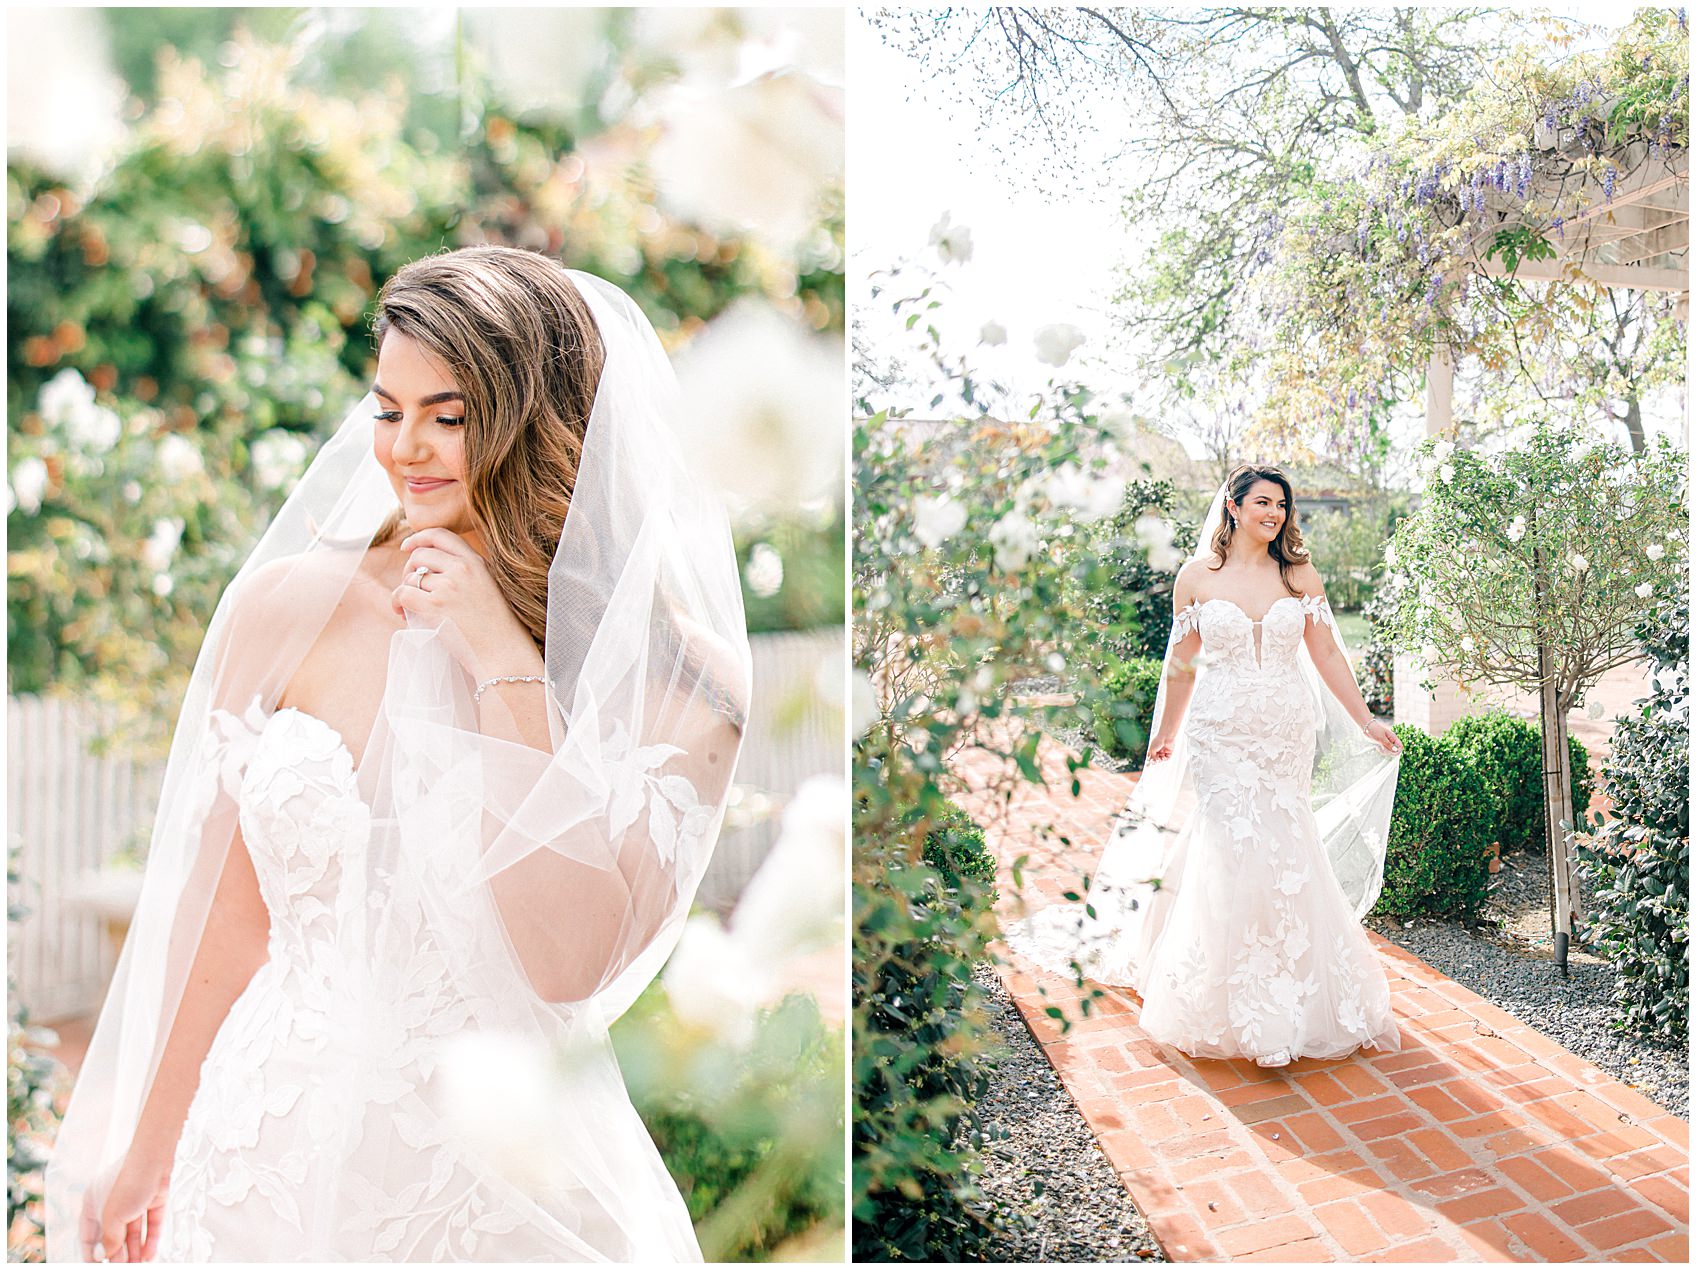 Woodbine Mansion Spring Bridal wedding Photos by Allison Jeffers Photography 0006